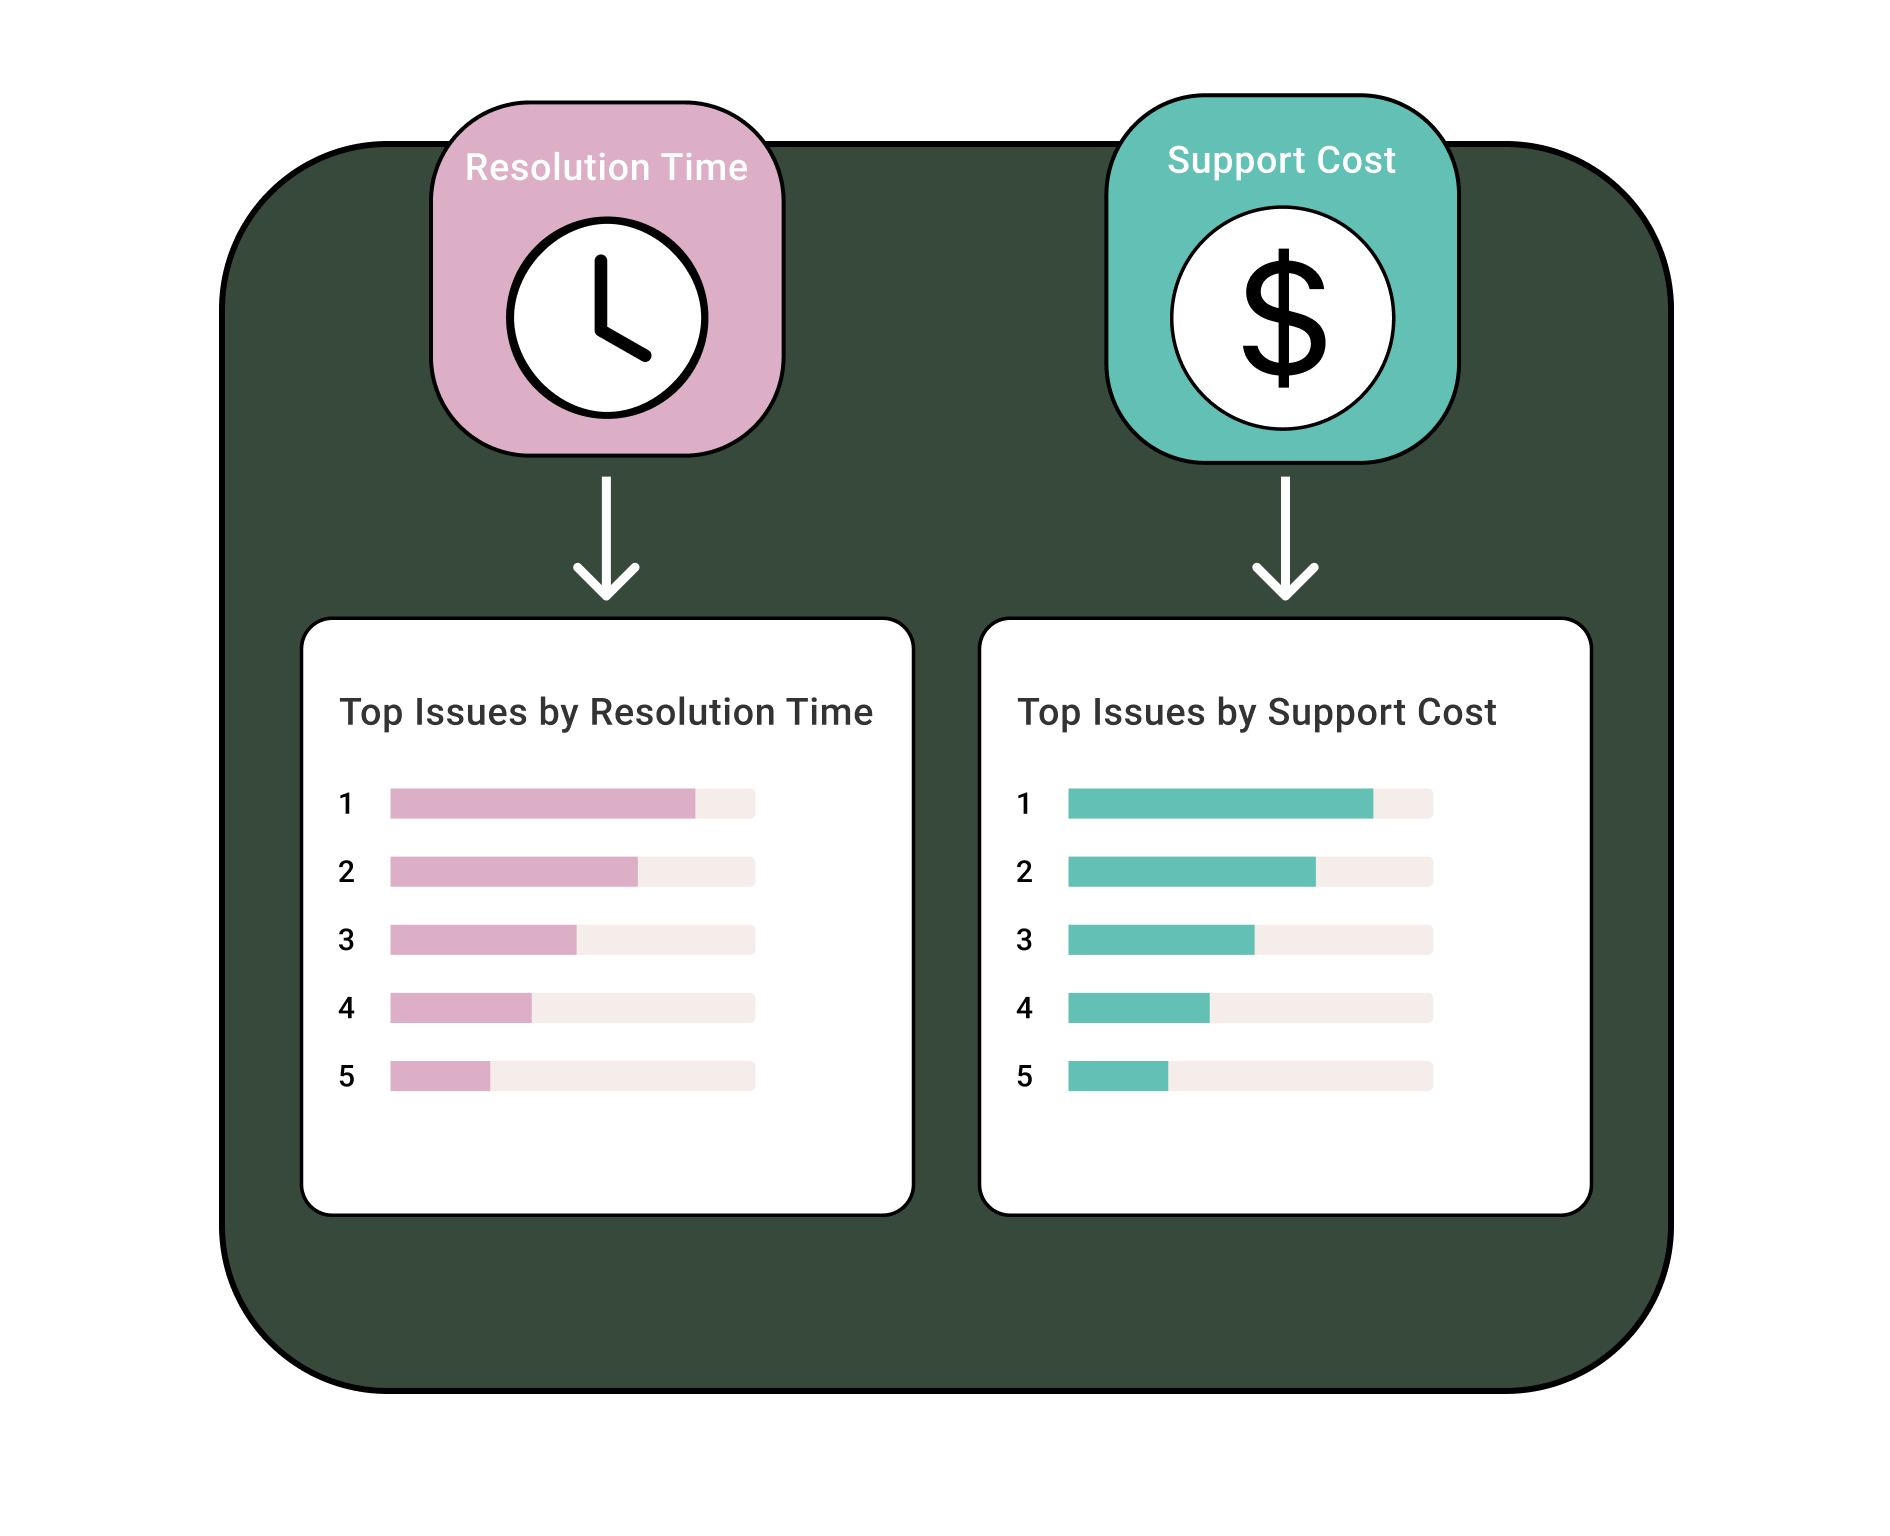 Resolution Time and Support Cost